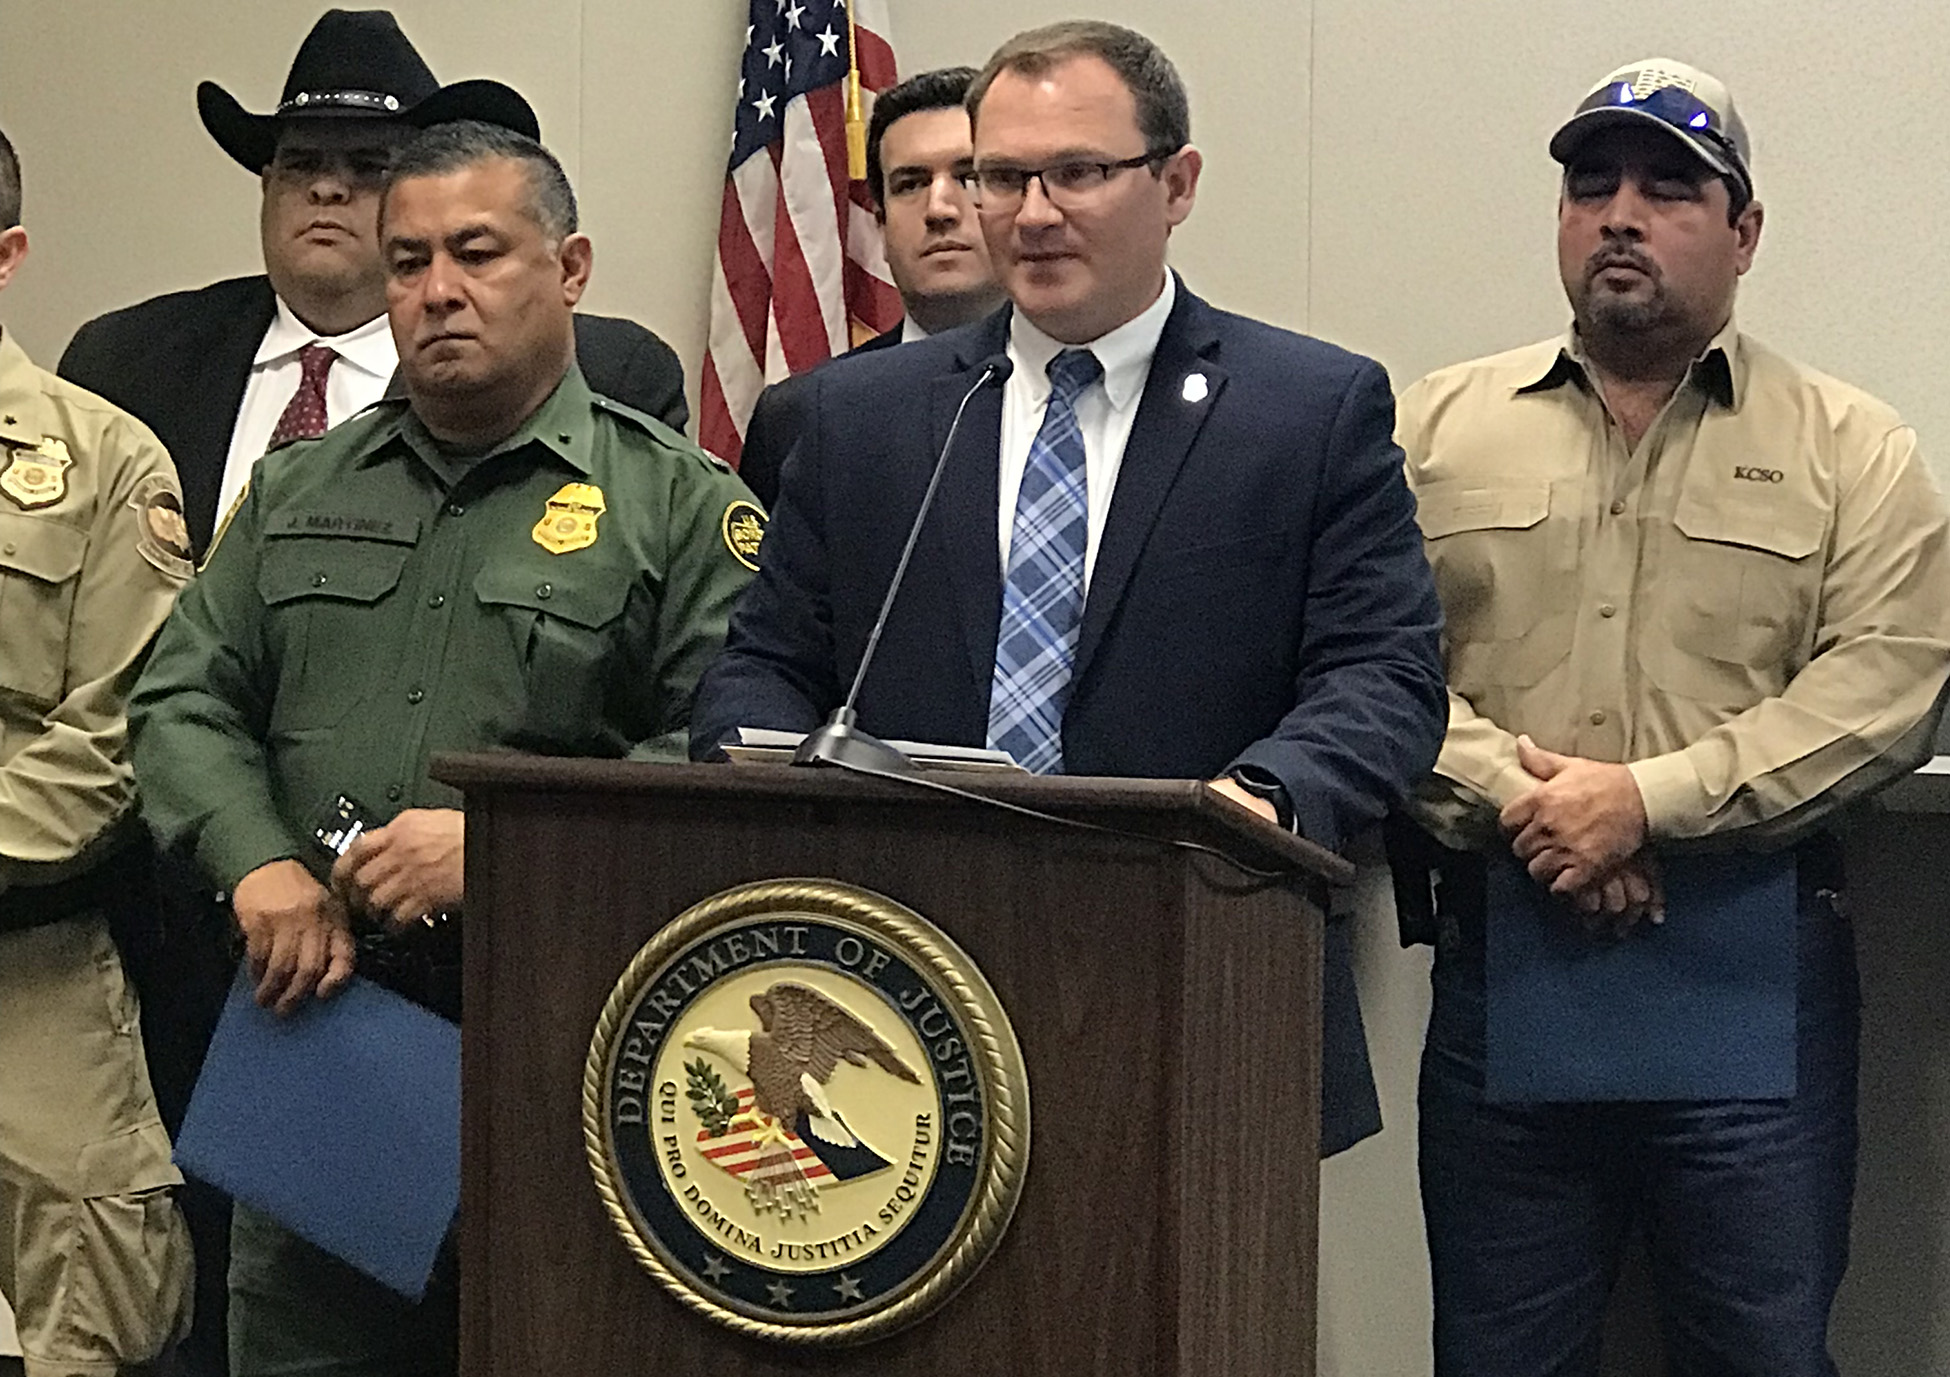 HSI San Antonio investigation leads to 6 charged in deadly noncitizen smuggling ring photo